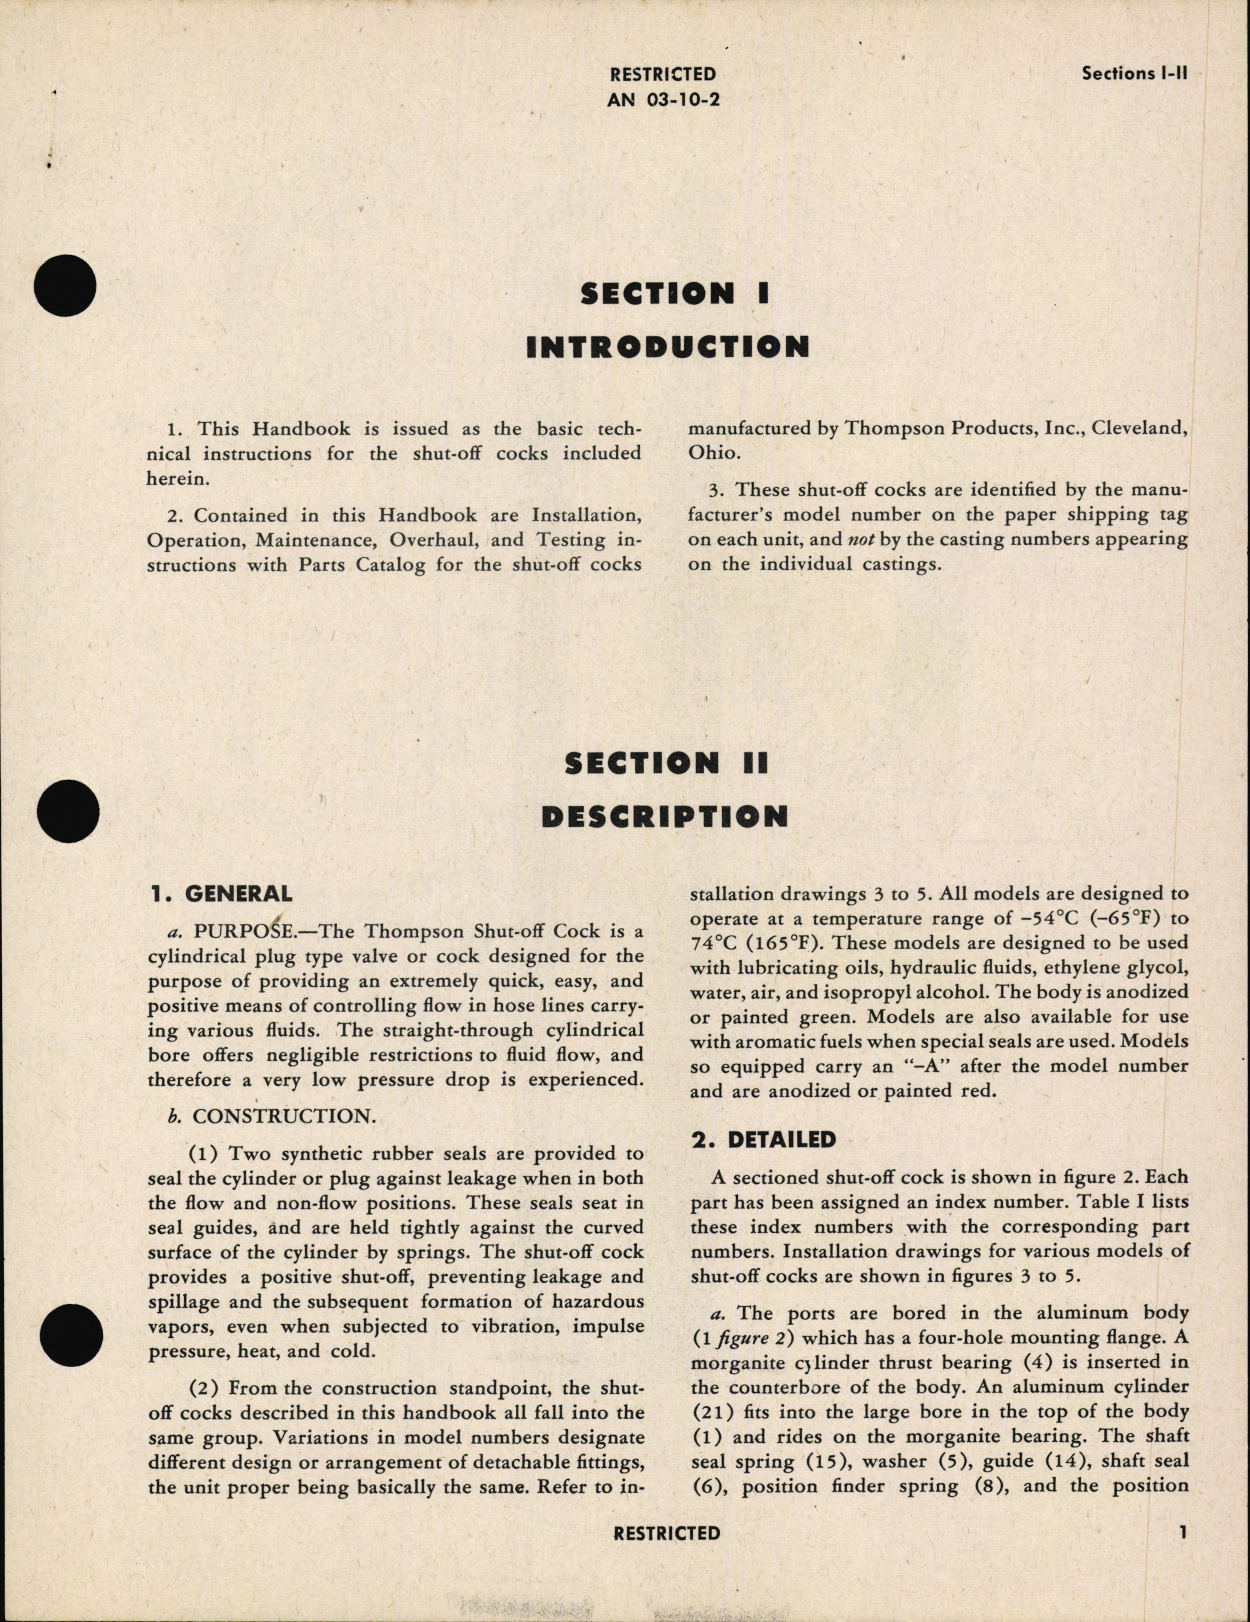 Sample page 5 from AirCorps Library document: Handbook of Instructions with Parts Catalog for Shut-Off Valves